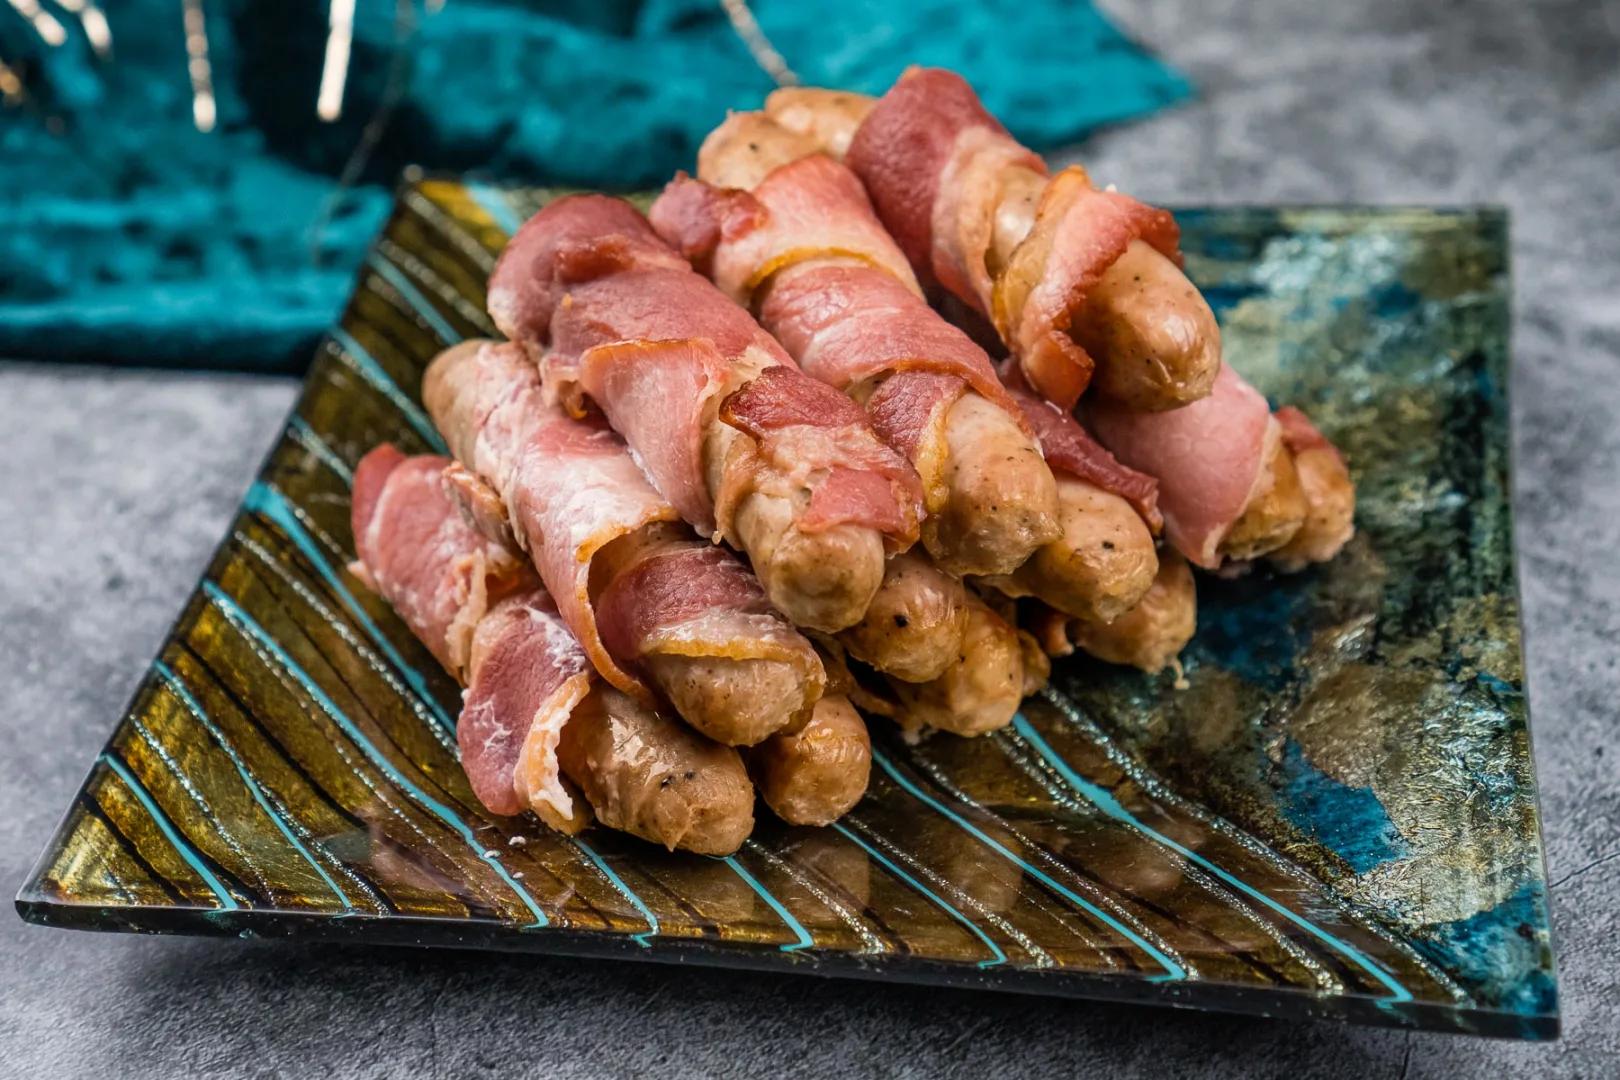 pigs in blankets smoked or unsmoked bacon - How do you keep pigs in blankets from getting soggy